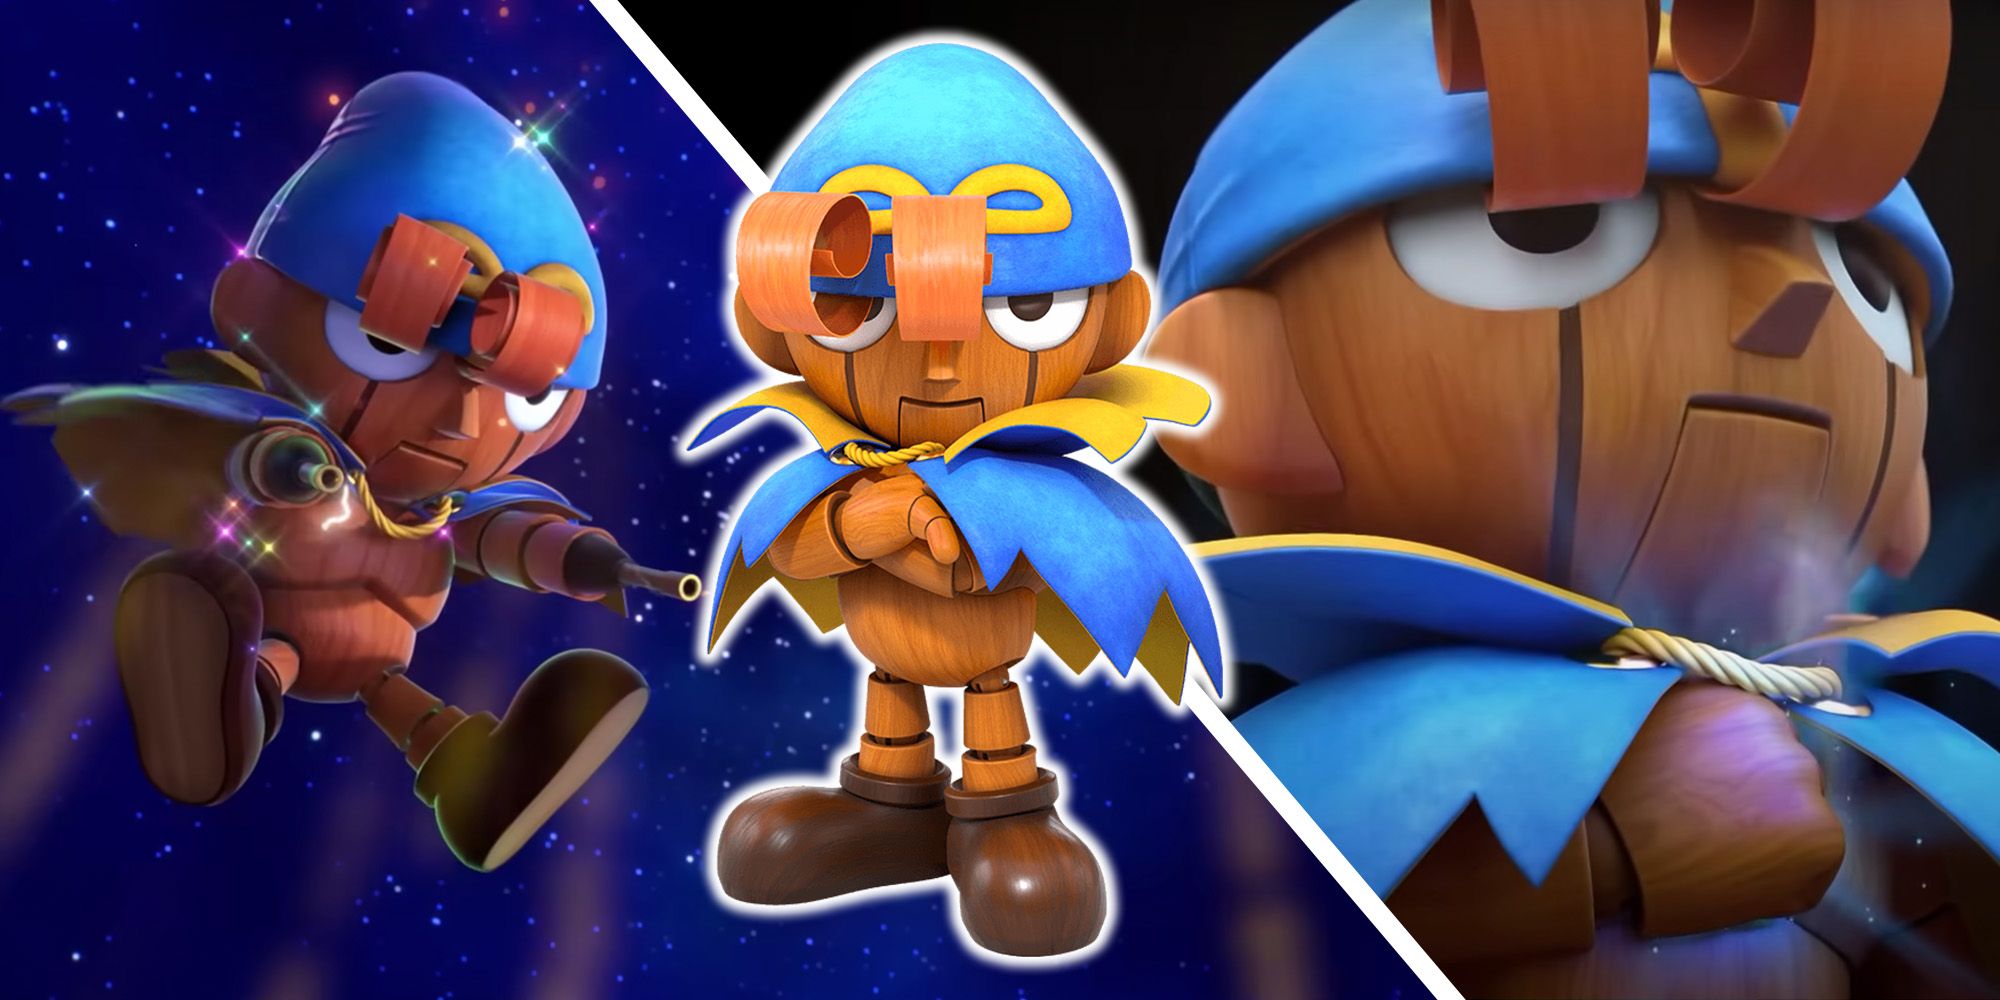 Super Mario RPG: Who is Geno? - Split image of Geno in space and Geno about to return to Star Road